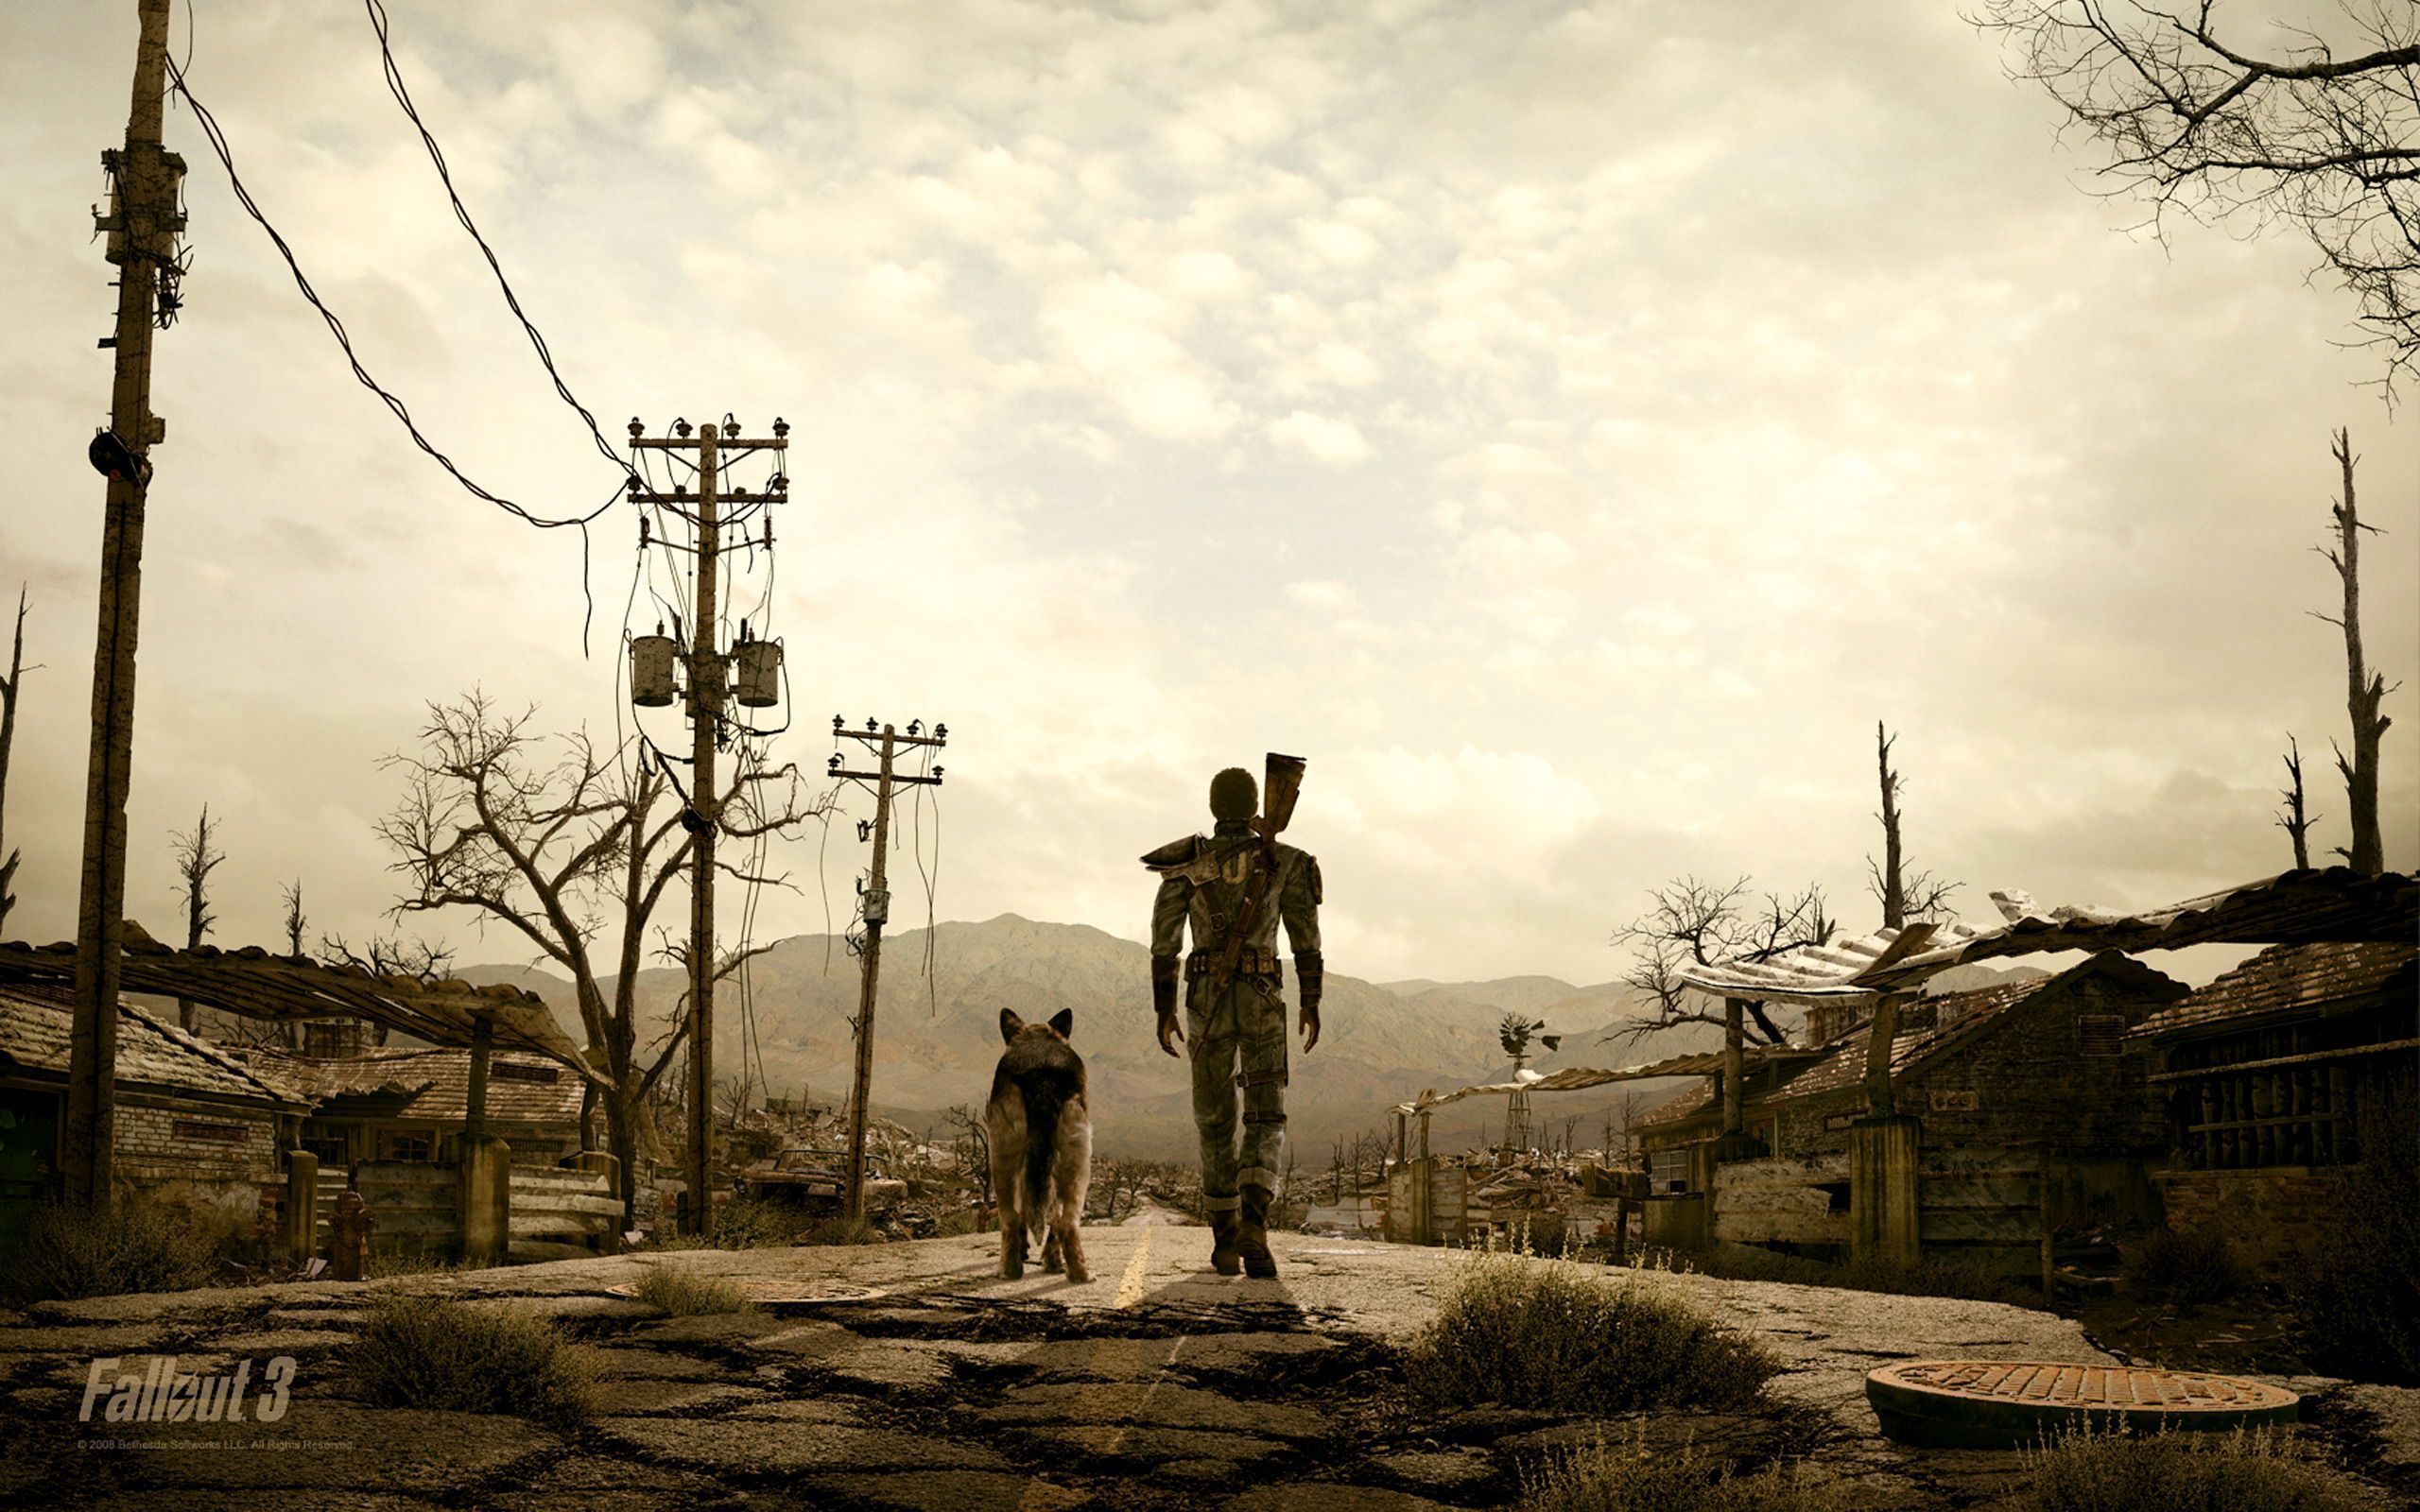 Fallout Wallpaper Designs 14871 - HD Wallpapers Site